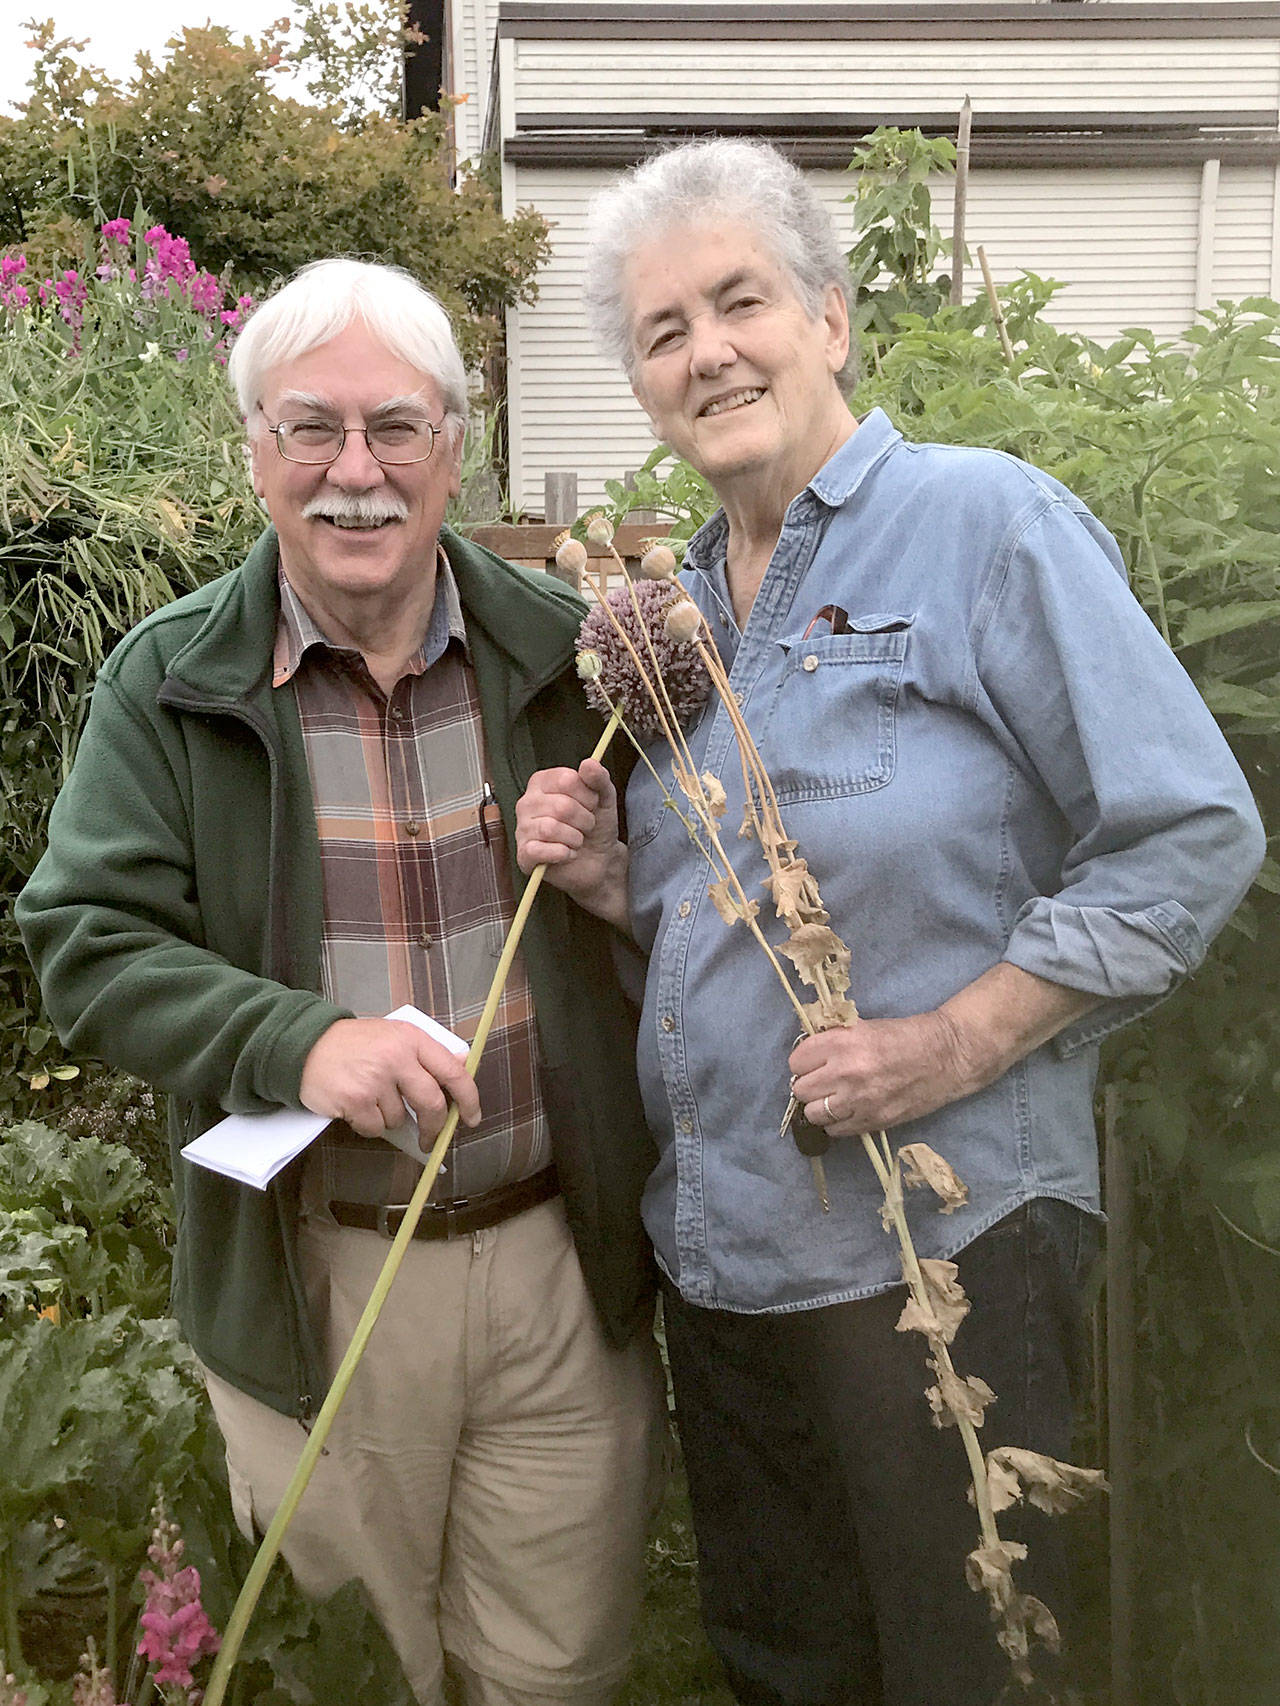 Bob Cain, left, and Muriel Nesbitt pose in the Fifth Street Community Garden in Port Angeles, where a variety of non-hybrid seeds are sown. (Betty Harriman)